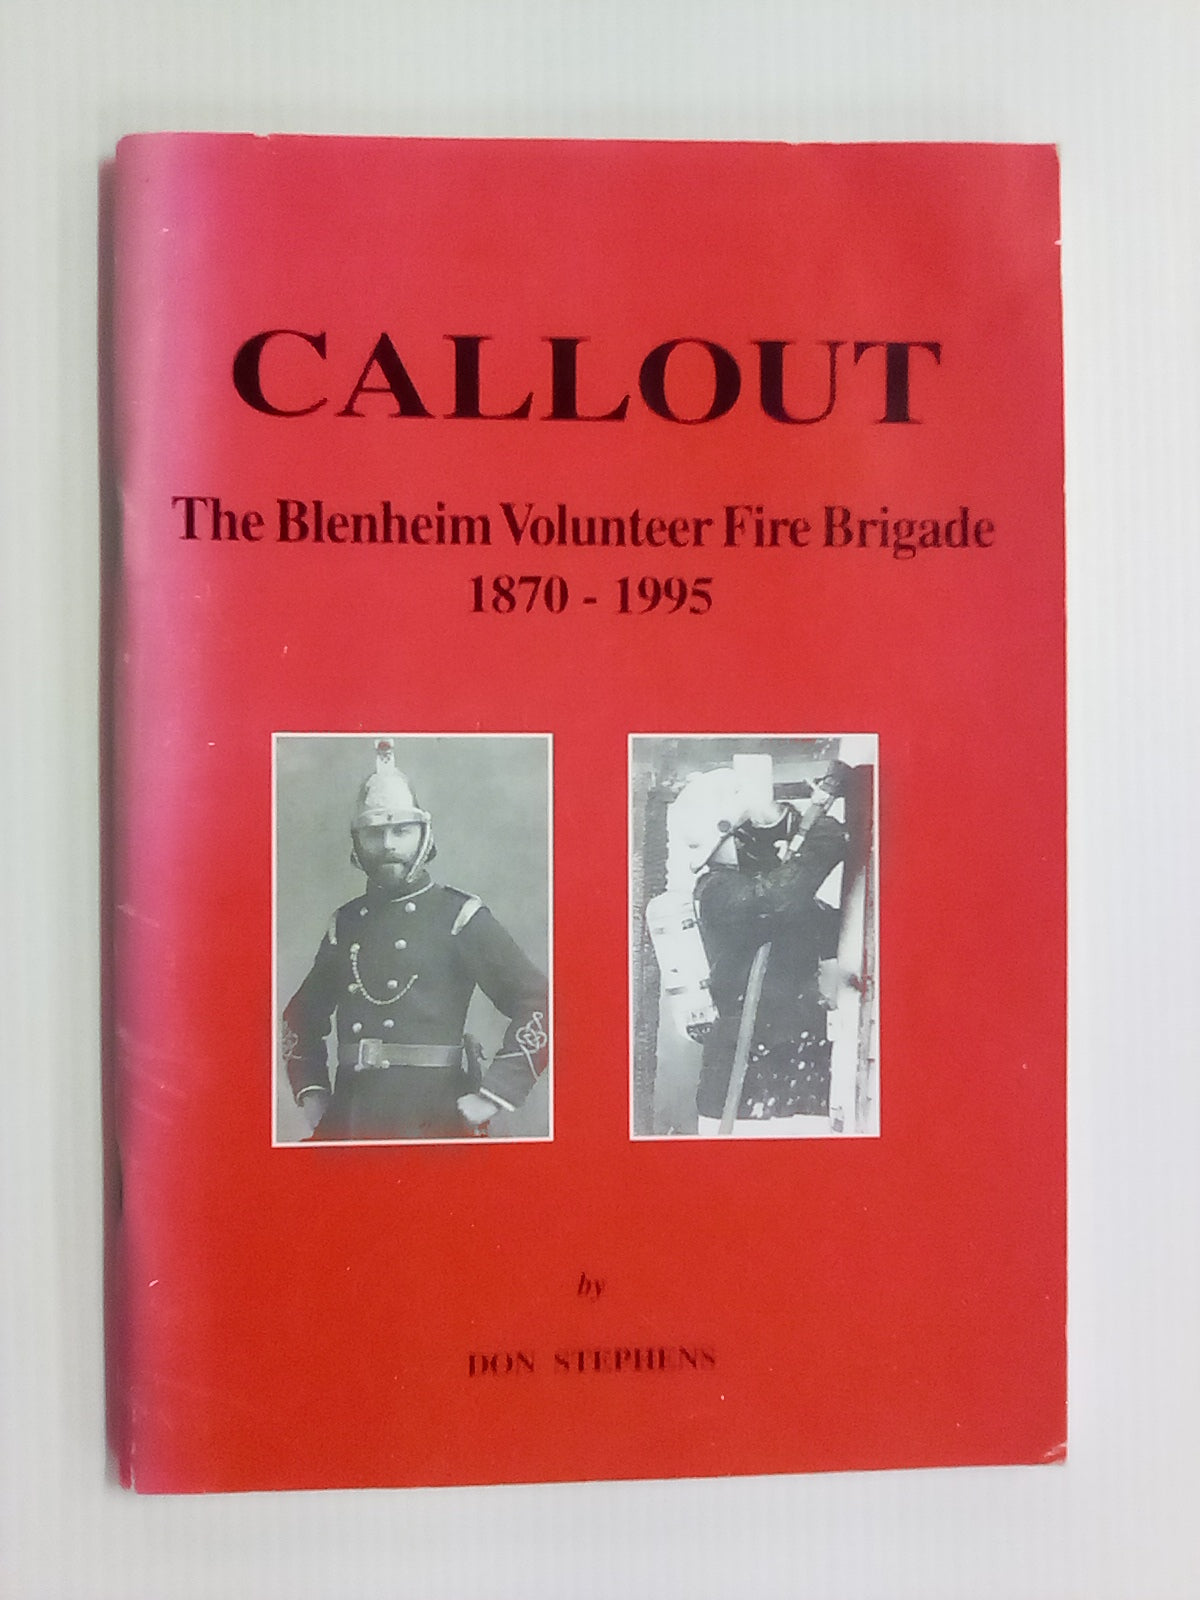 Callout - The Blenheim Volunteer Fire Brigade 1870-1995 by Don Stephens